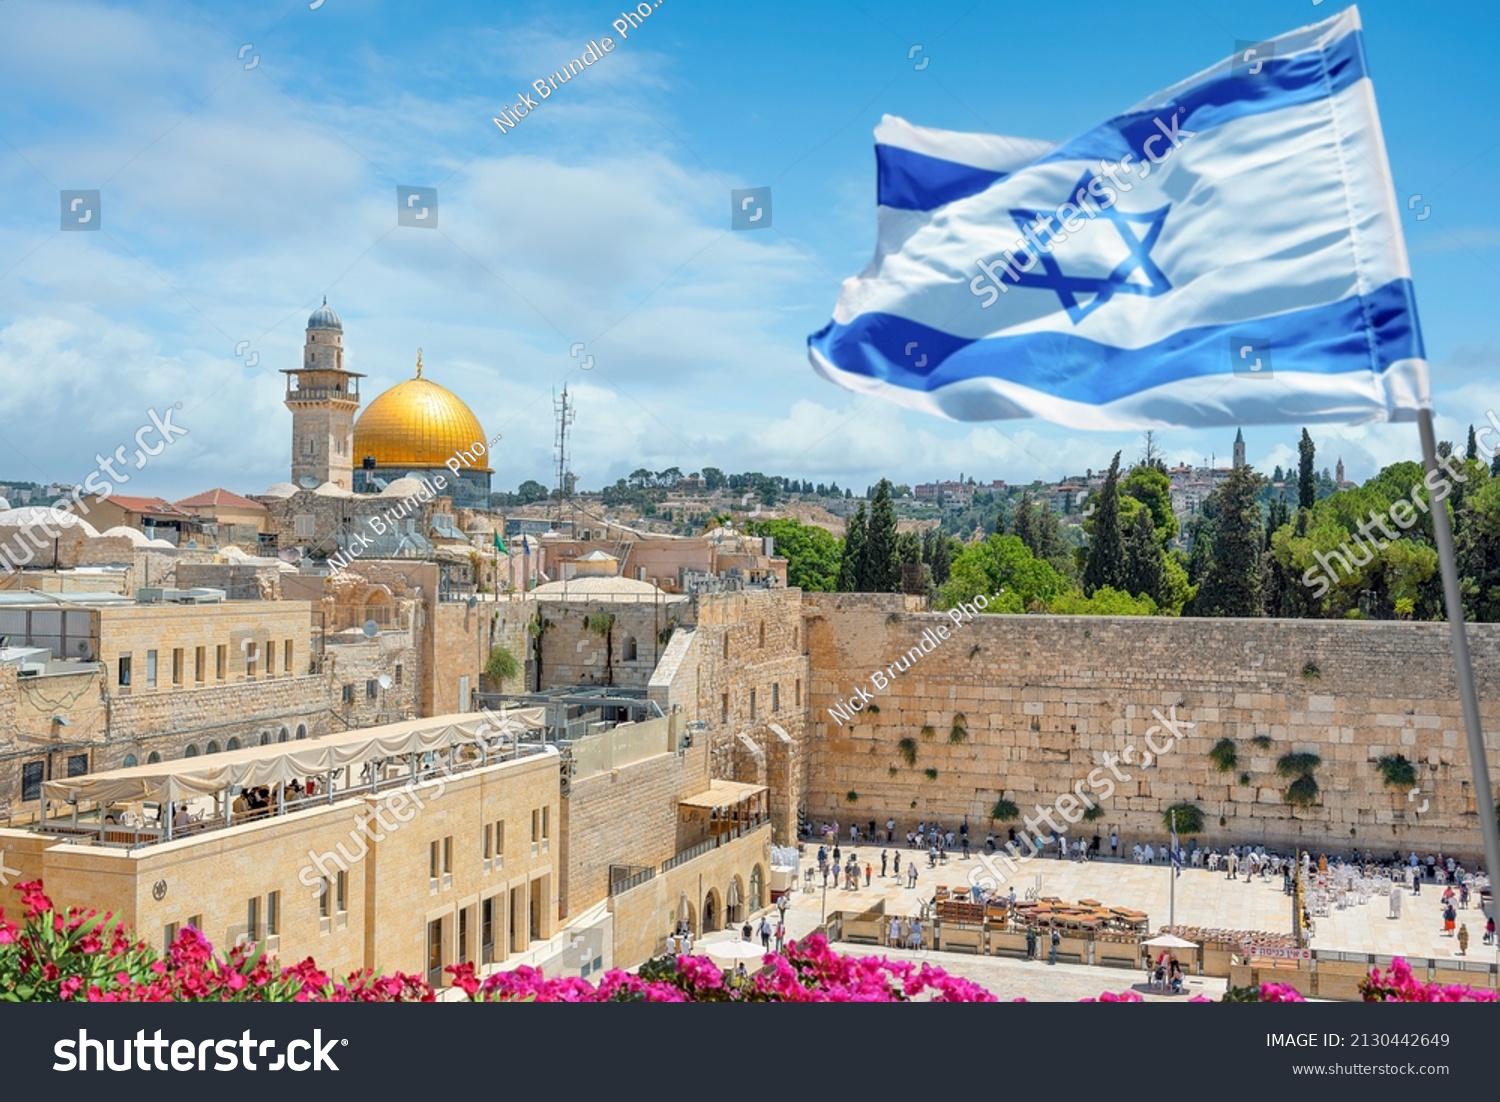 An Israeli flag blows in the wind as jewish orthodox believers read the Torah and pray facing the Western Wall, also known as Wailing Wall in Old City in Jerusalem, Israel.  #2130442649